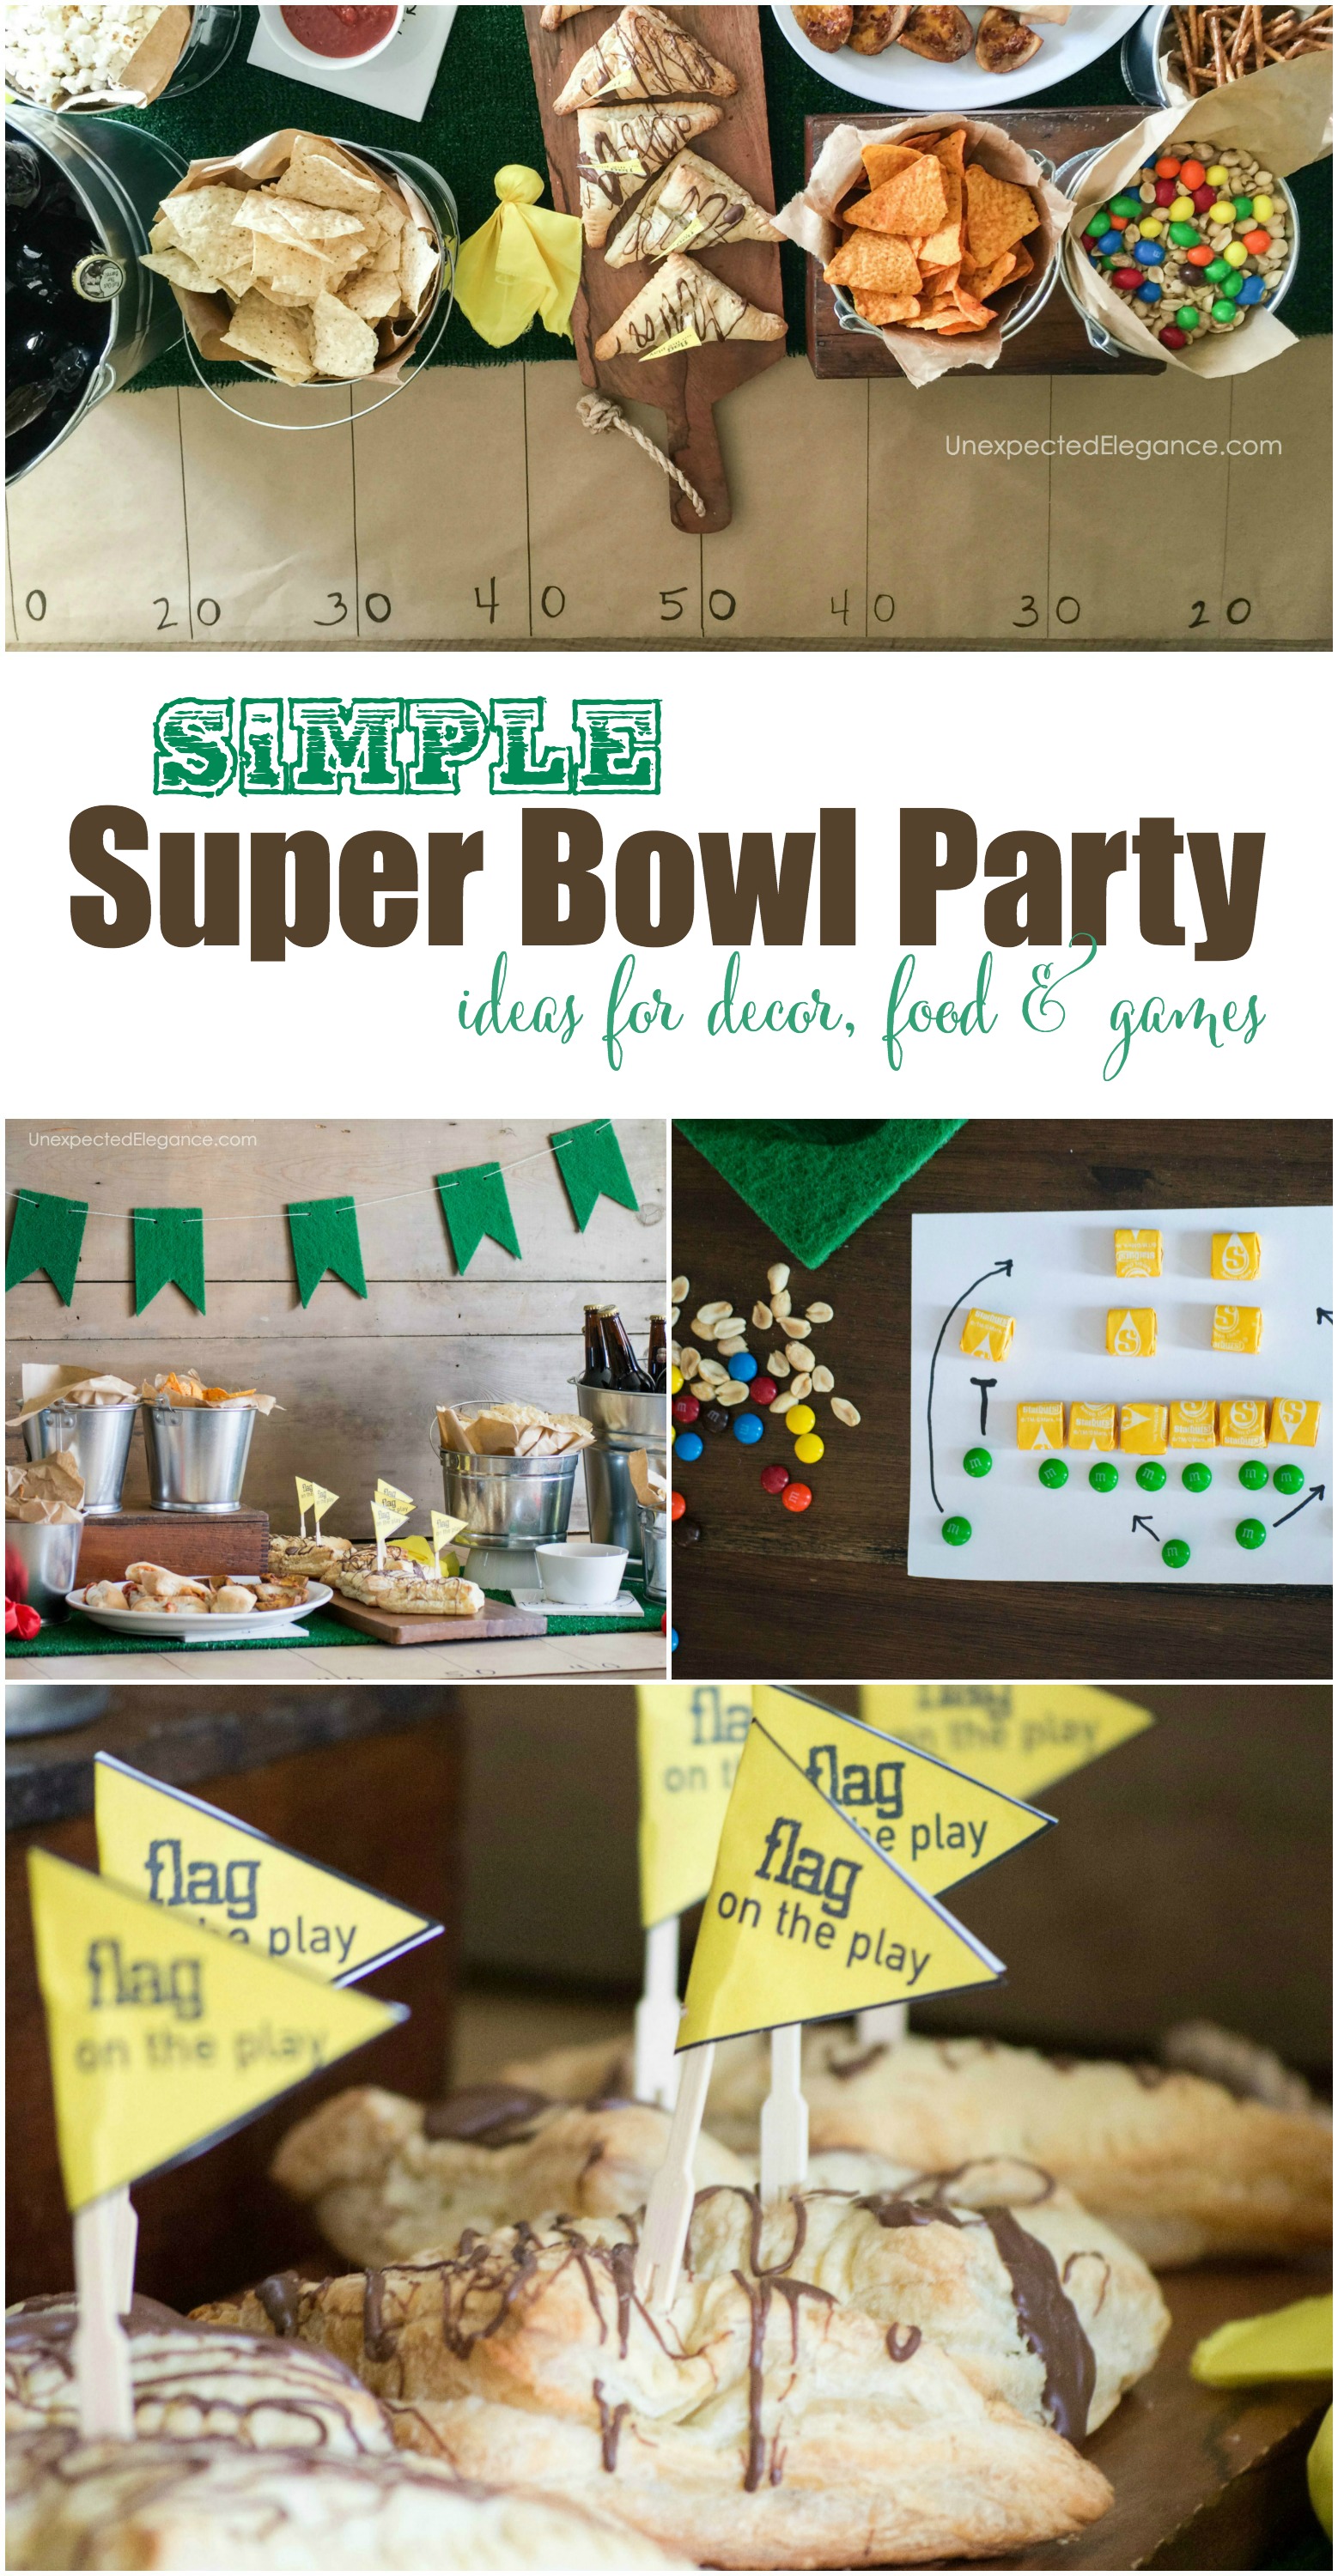 SIMPLE Ideas for a FUN Super Bowl Party | Decor, Food & Games - Unexpected Elegance